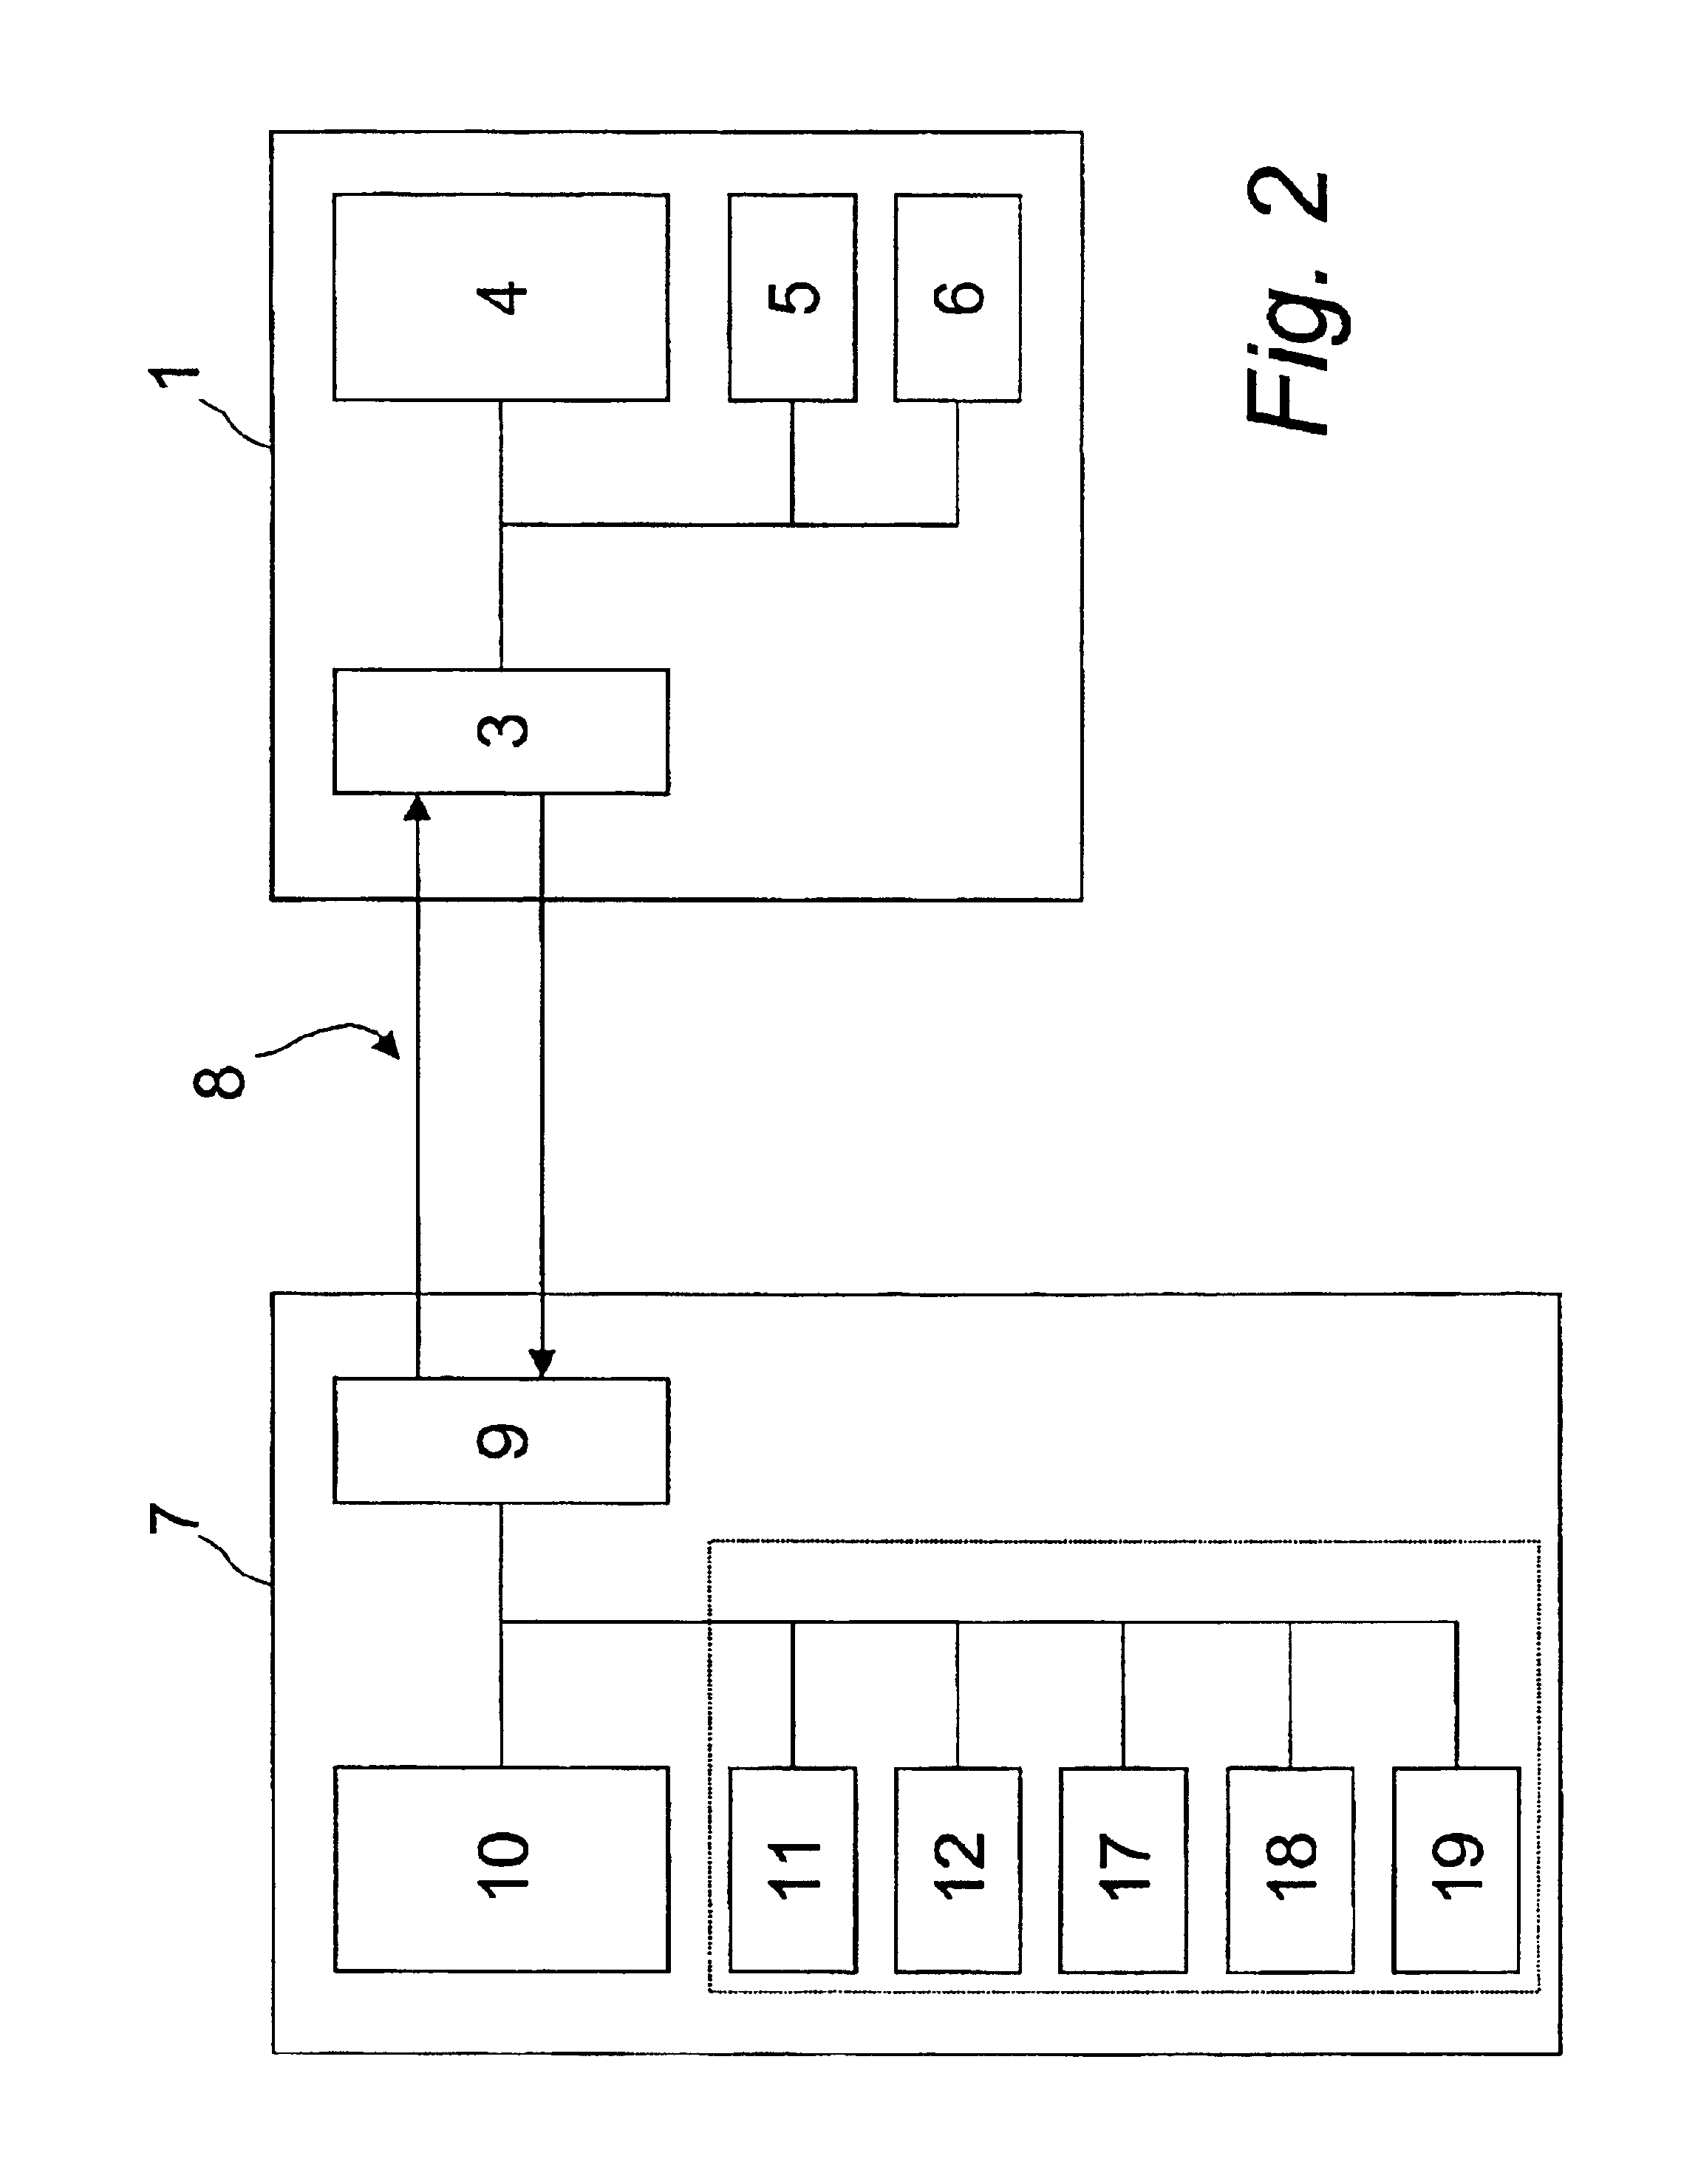 Communication system for use with a vehicle